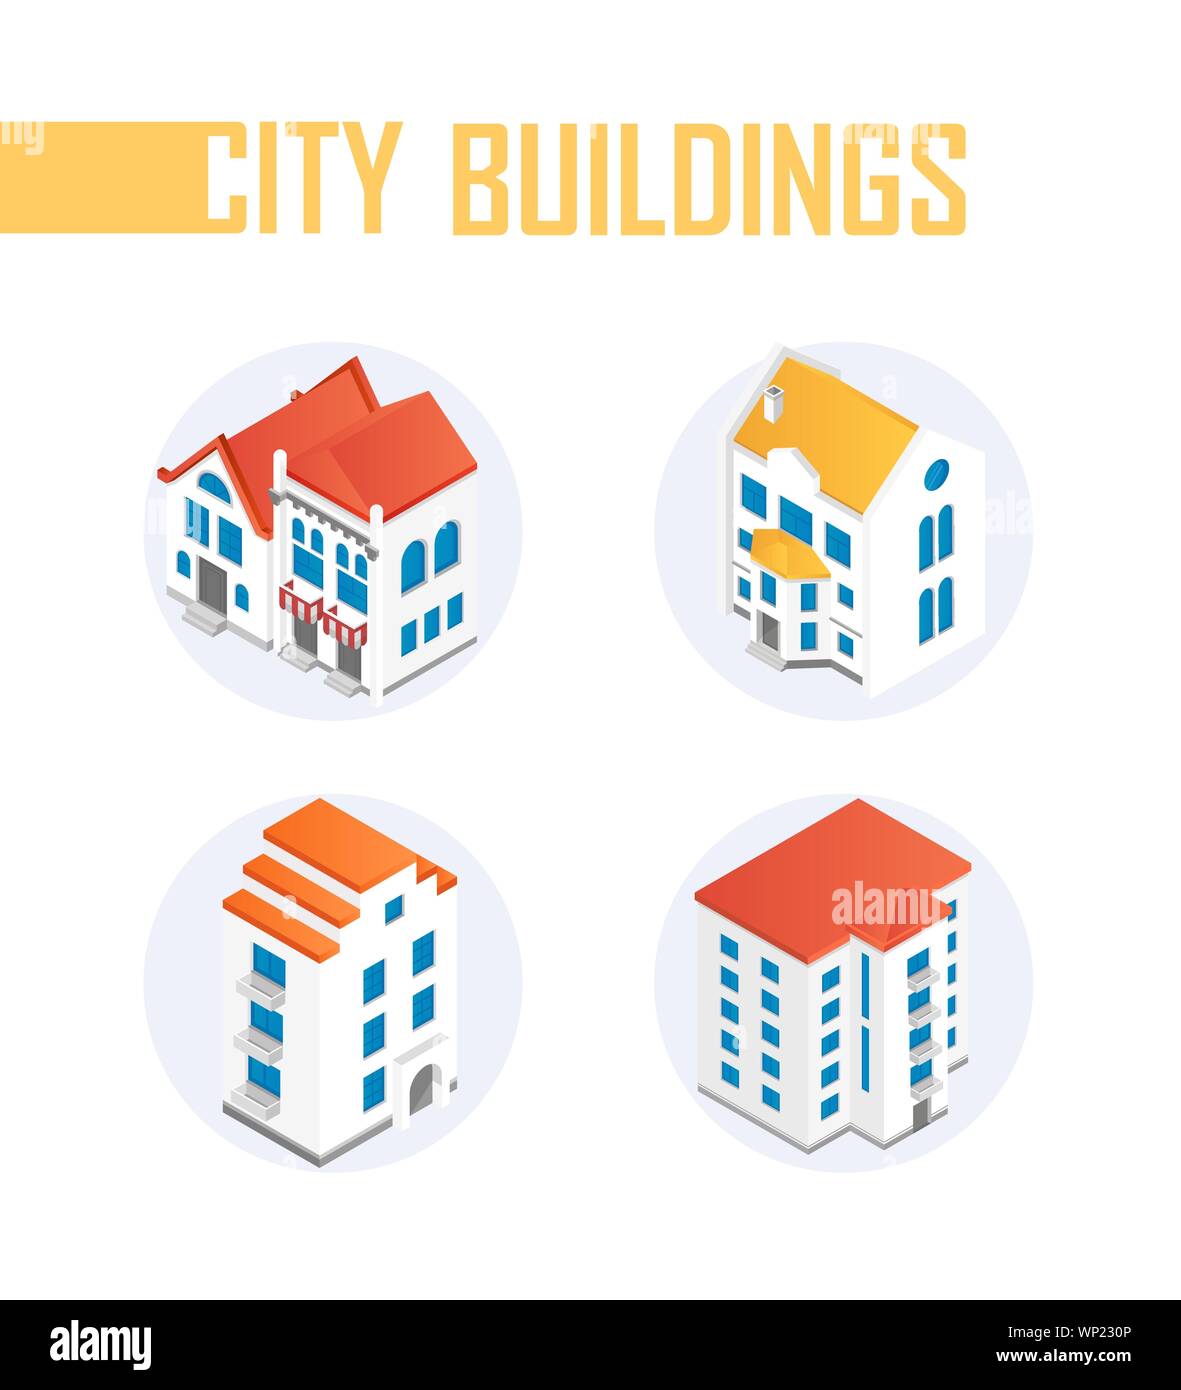 City buildings - modern vector colorful isometric elements on white background. High quality collection of four objects, apartment houses, shops, cafe Stock Vector